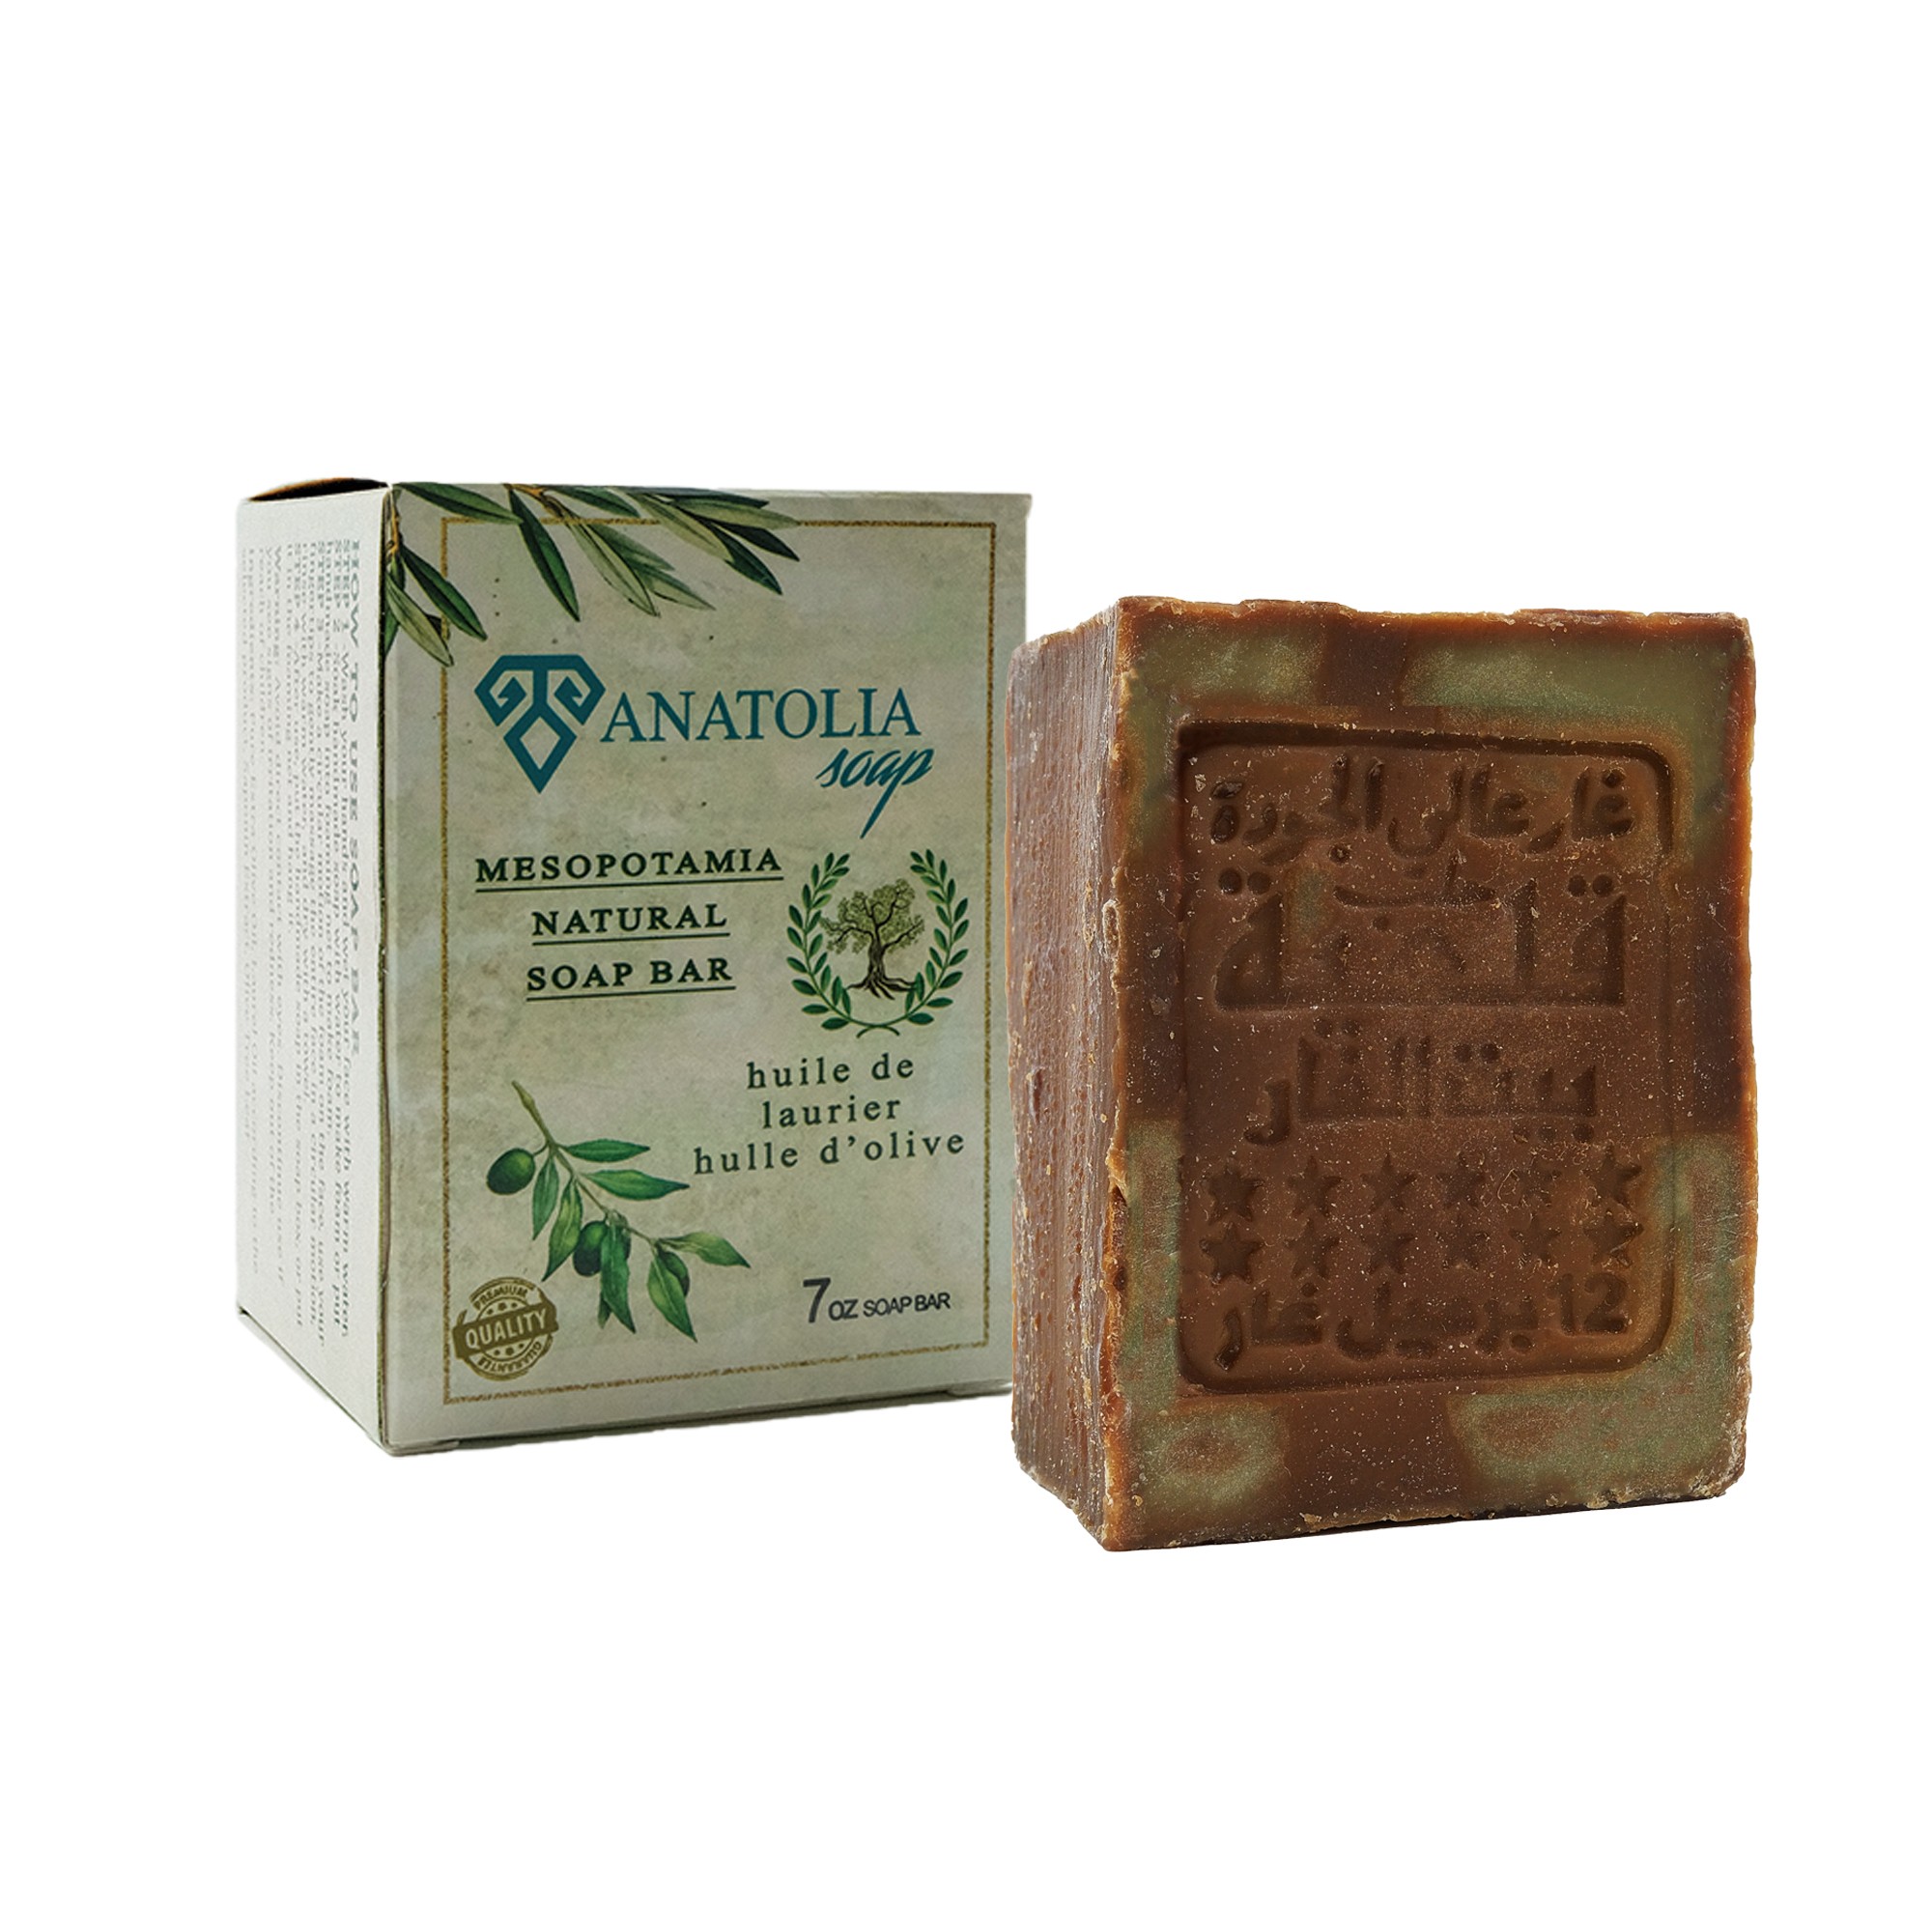 Mesopotamia 180 G Aleppo Soap with 60% Laurel  and 40% Olive Oil Organic Handmade Natural Moisturizer for Dry and Normal Skin